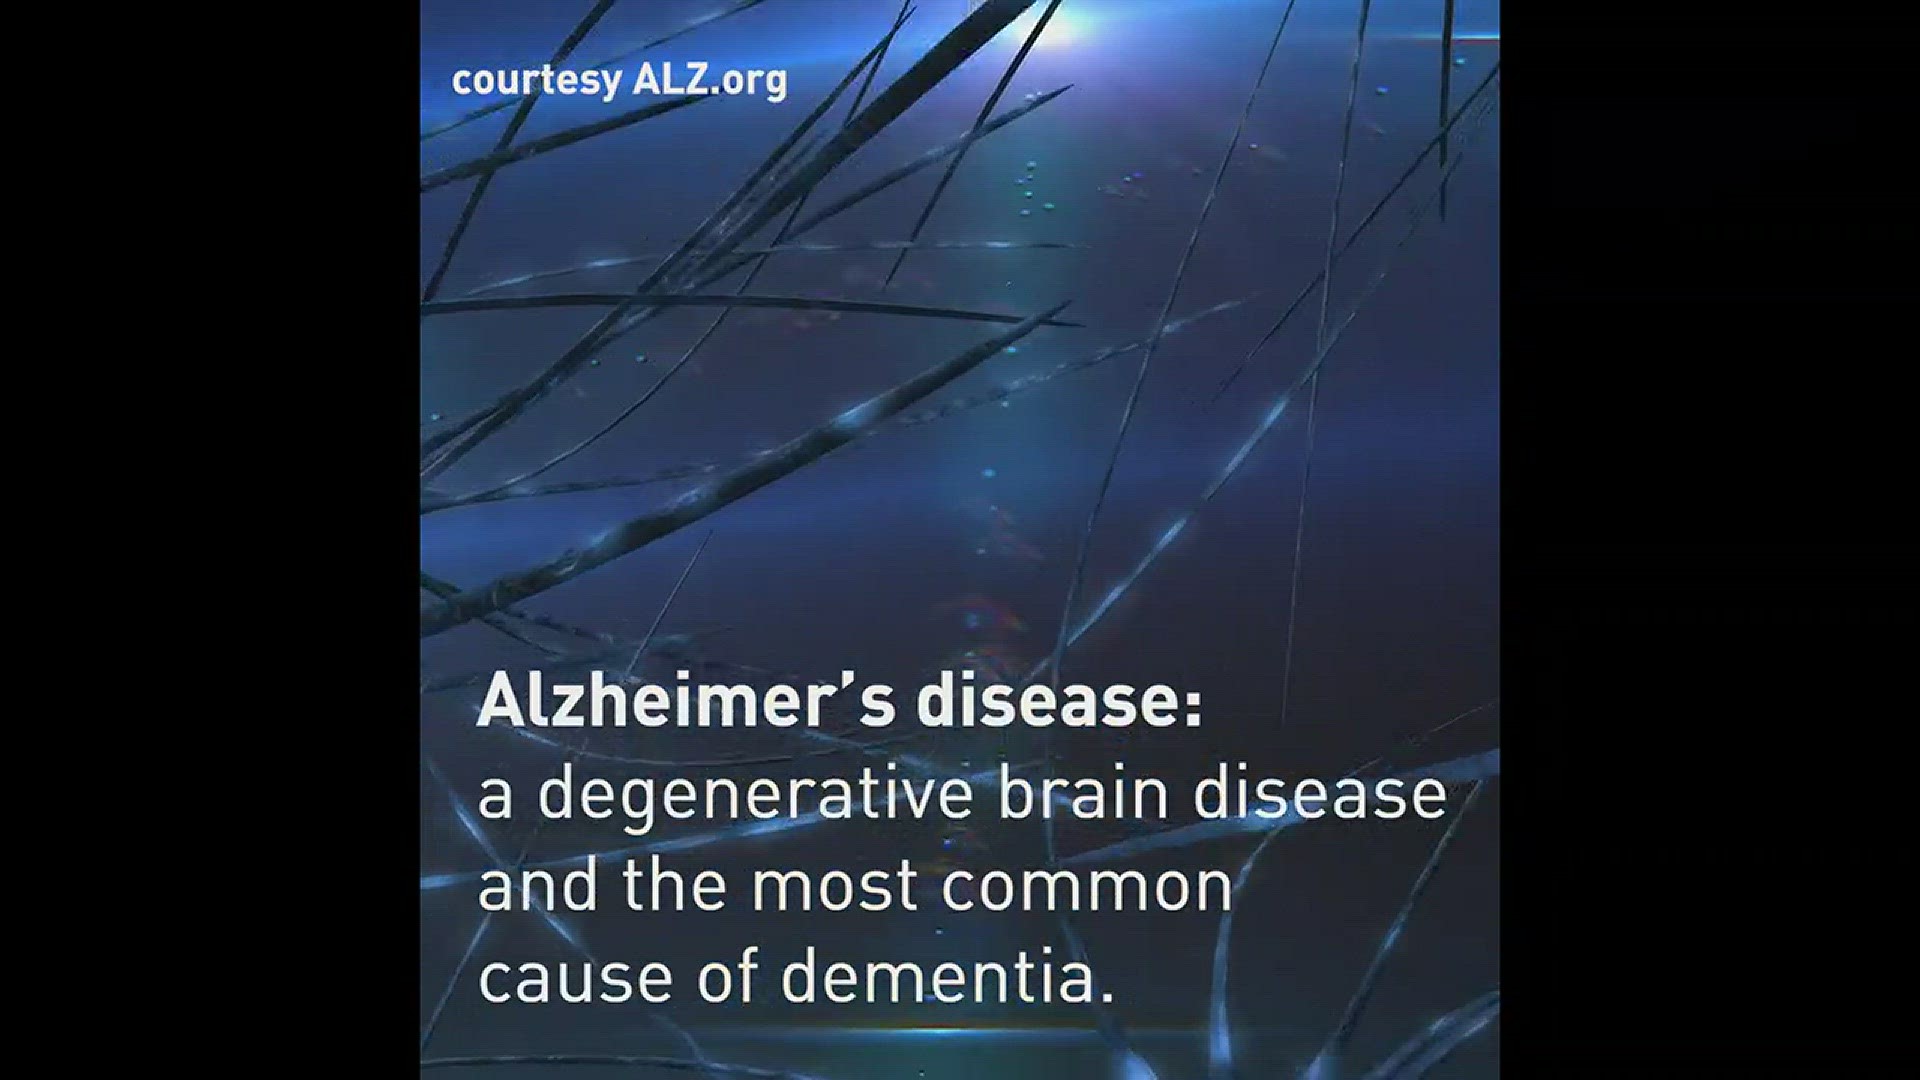 Alzheimer's disease is a degenerative brain disease and the most common cause of dementia, the Alz.org report states.